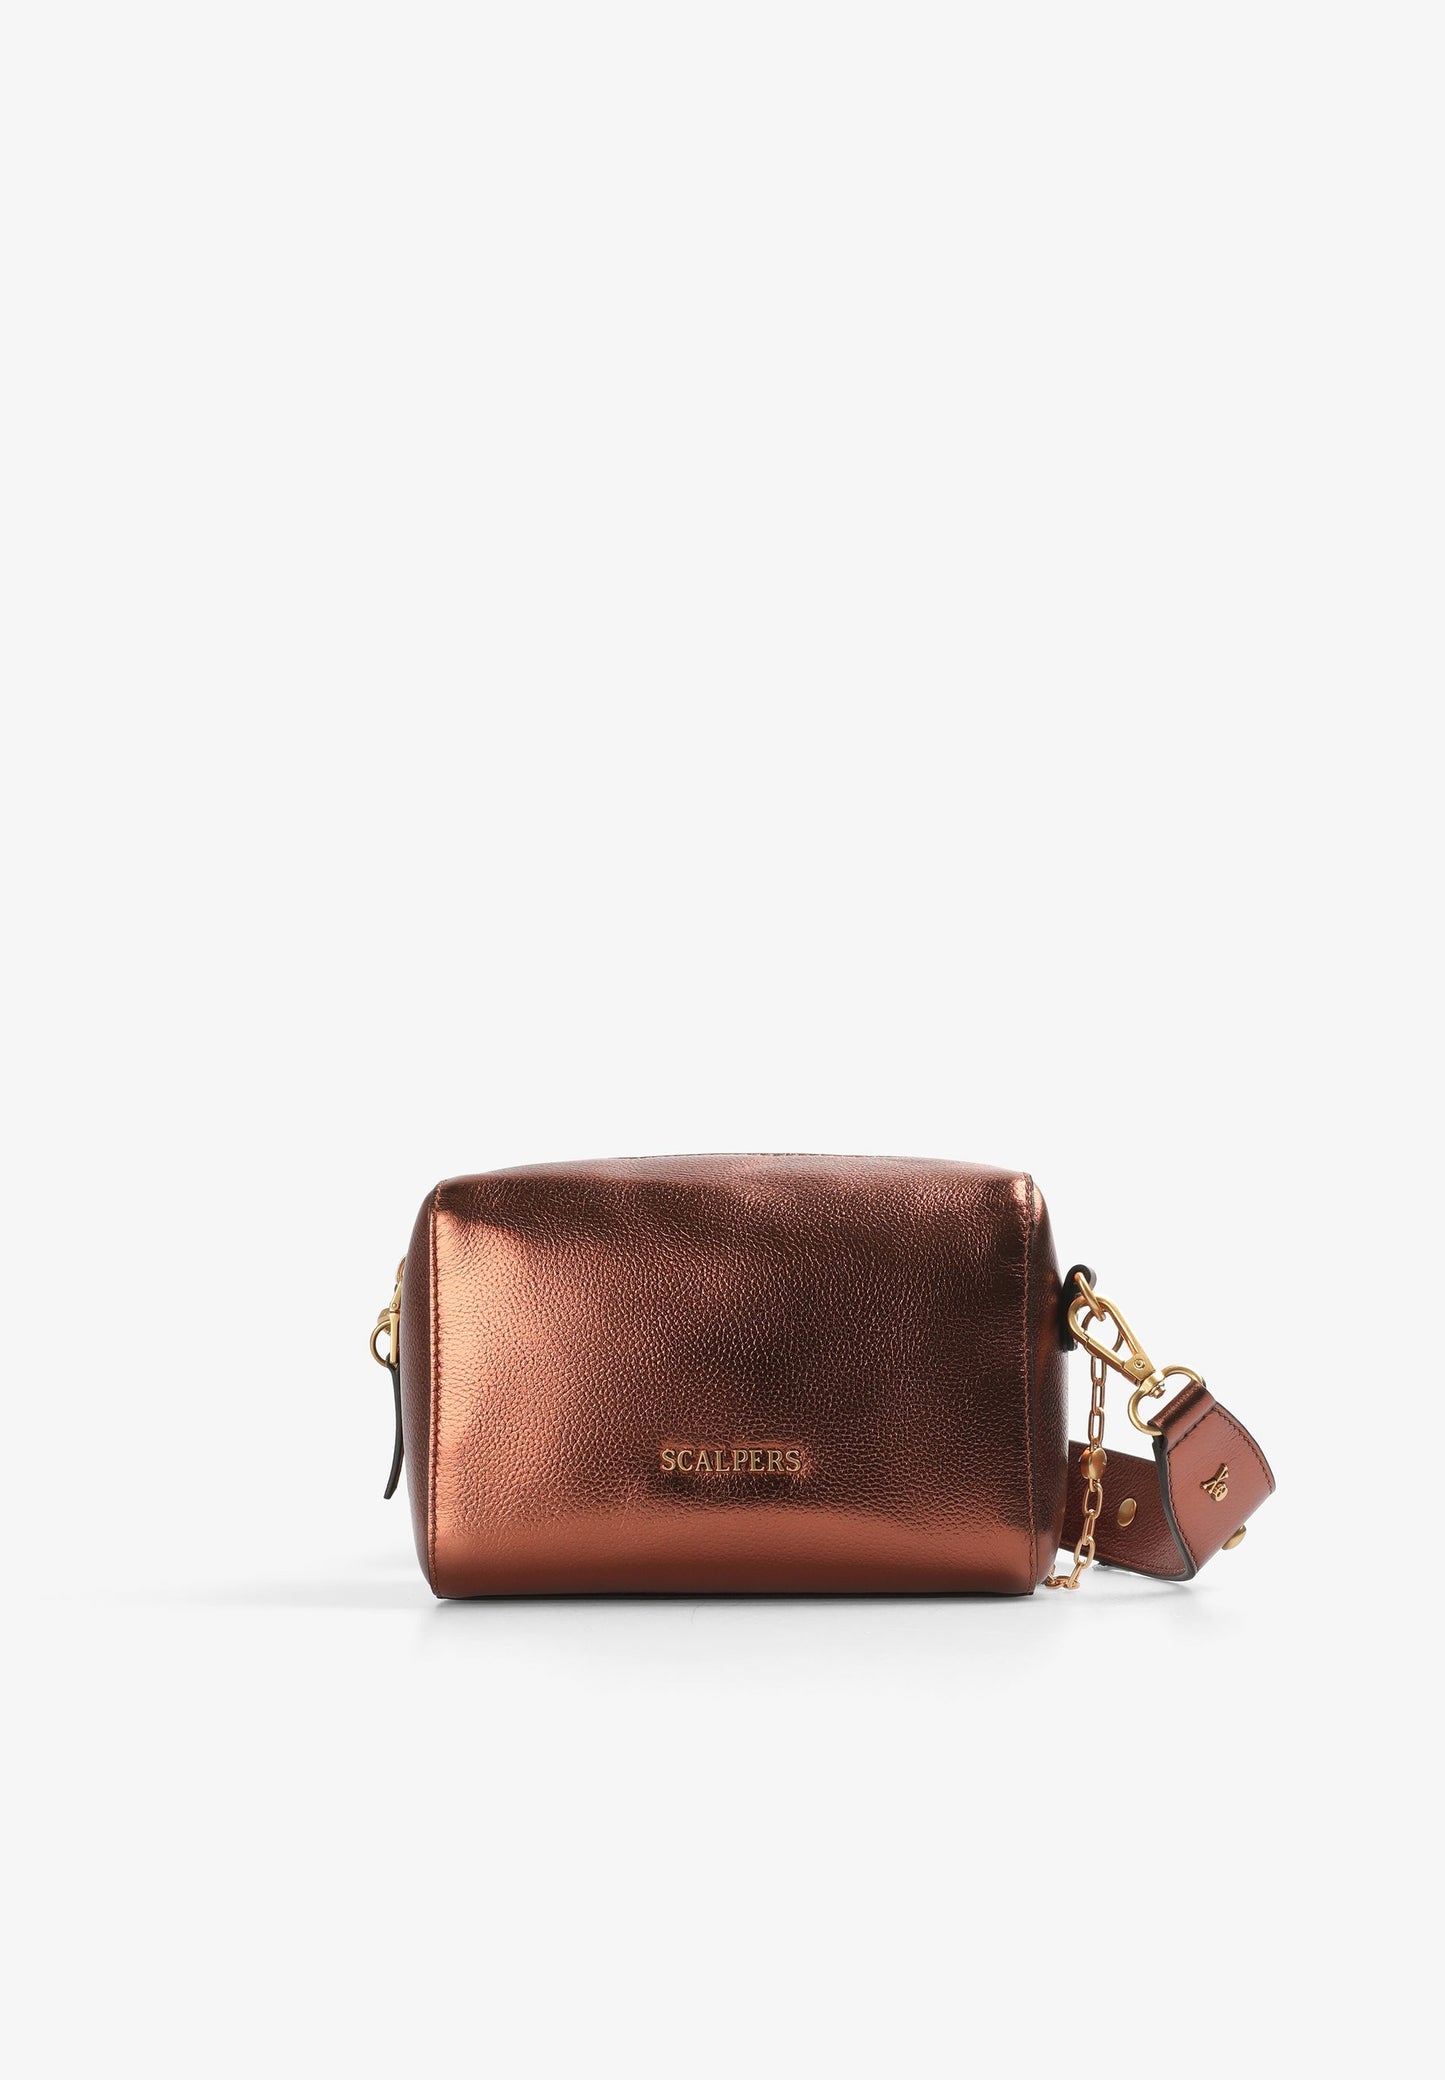 METALLIC LEATHER BAG WITH CHAIN STRAP